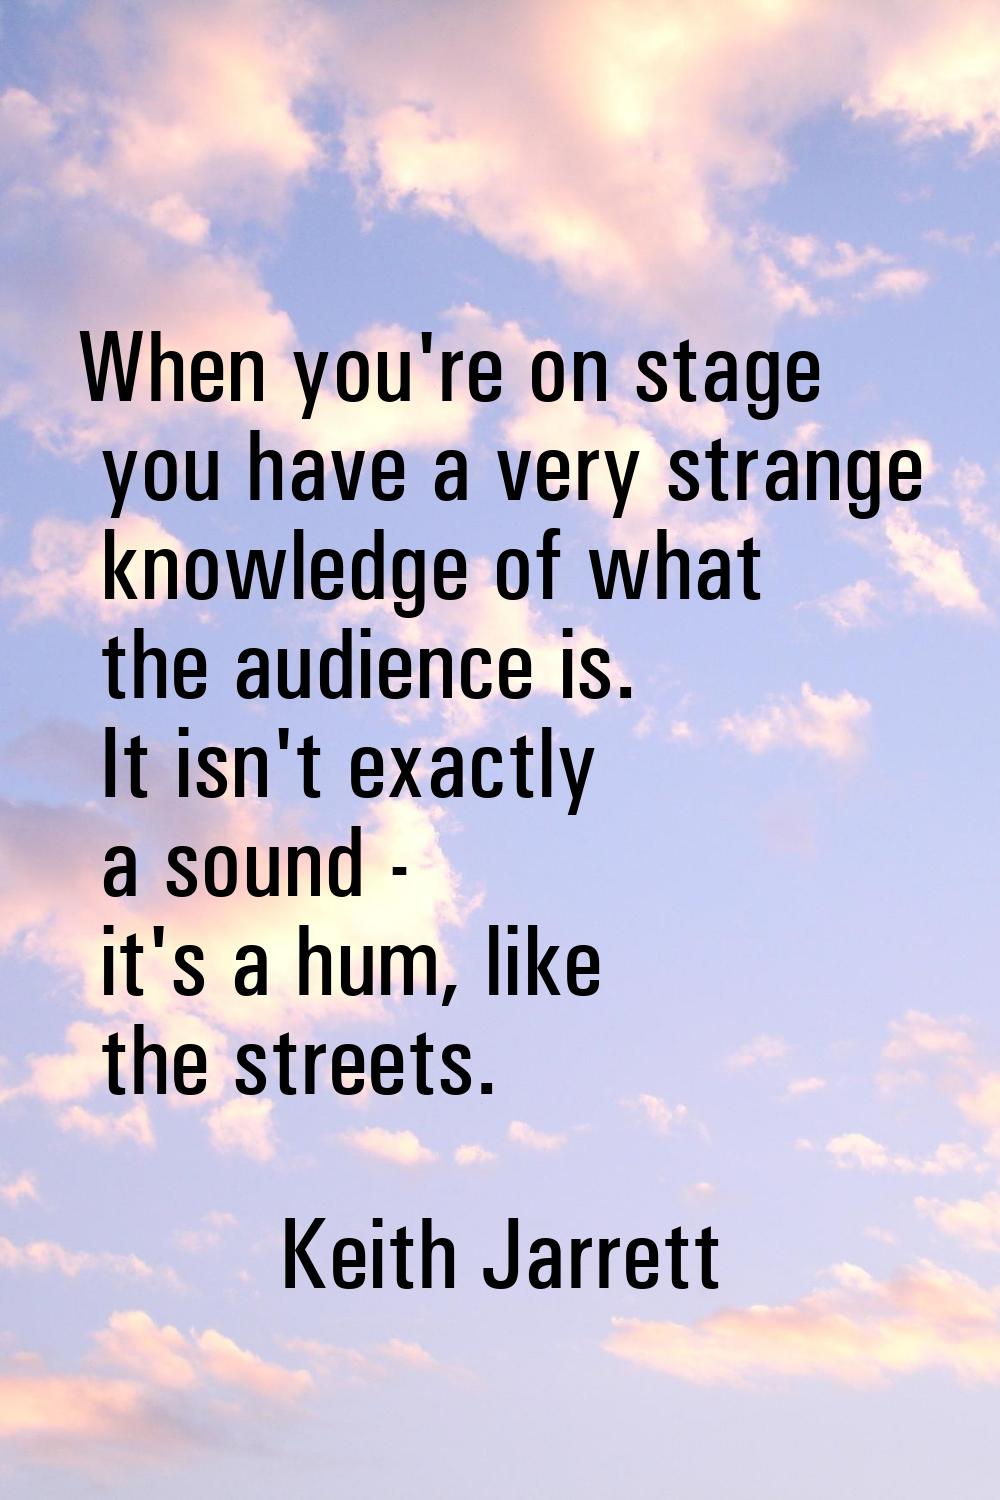 When you're on stage you have a very strange knowledge of what the audience is. It isn't exactly a 